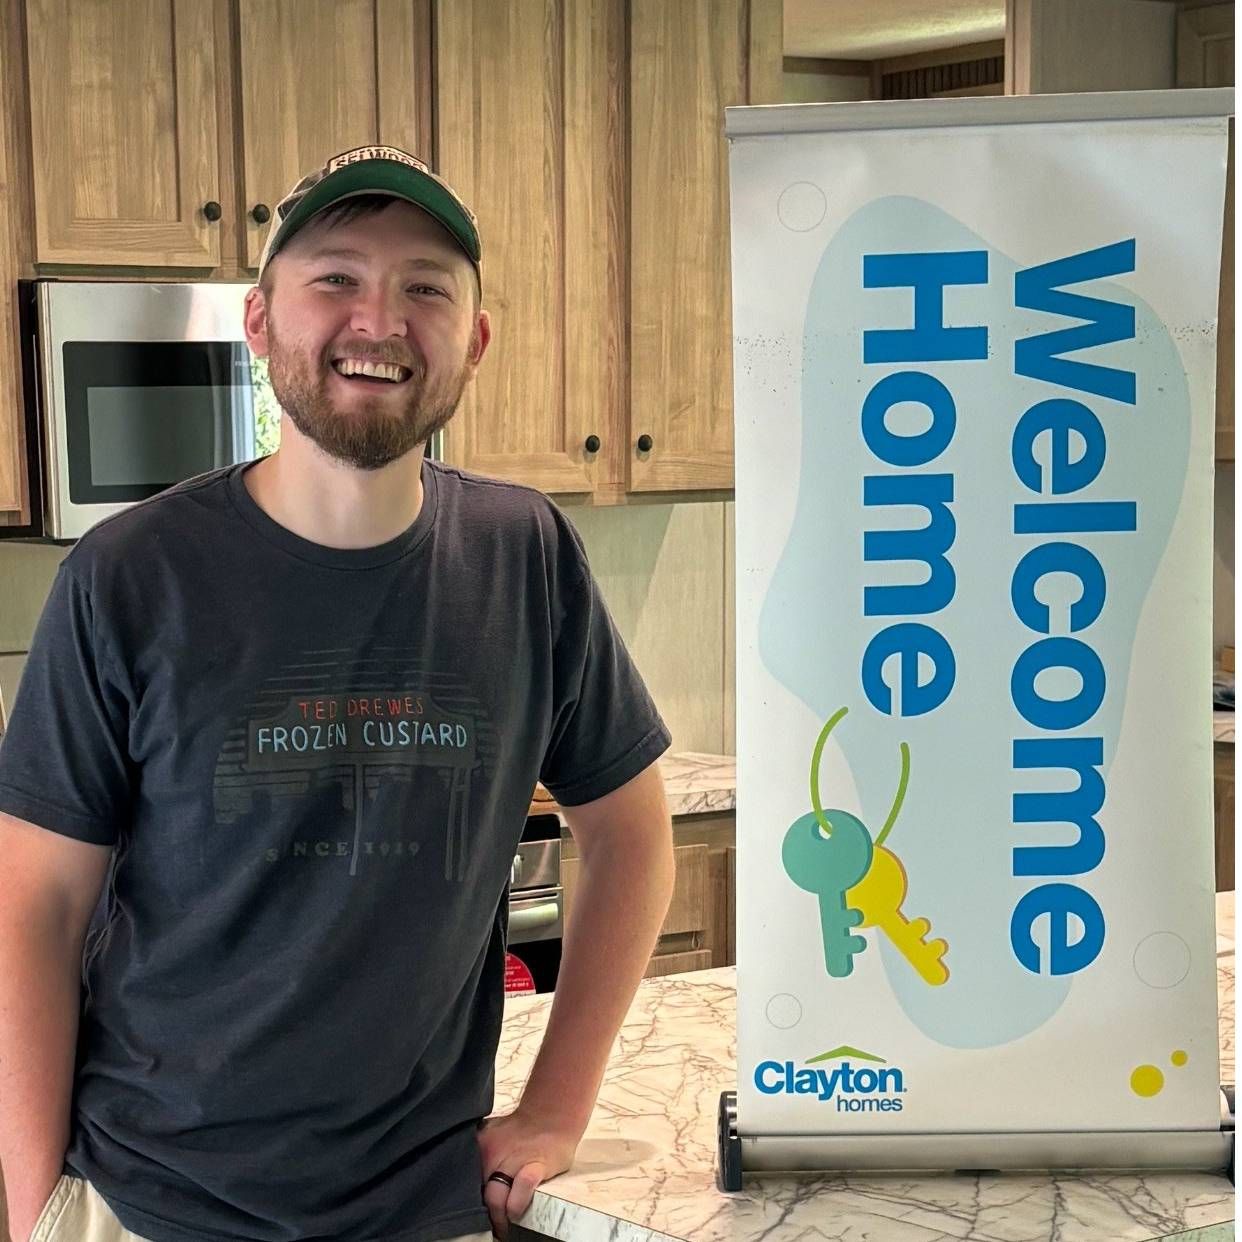 HUNTER S. welcome home image